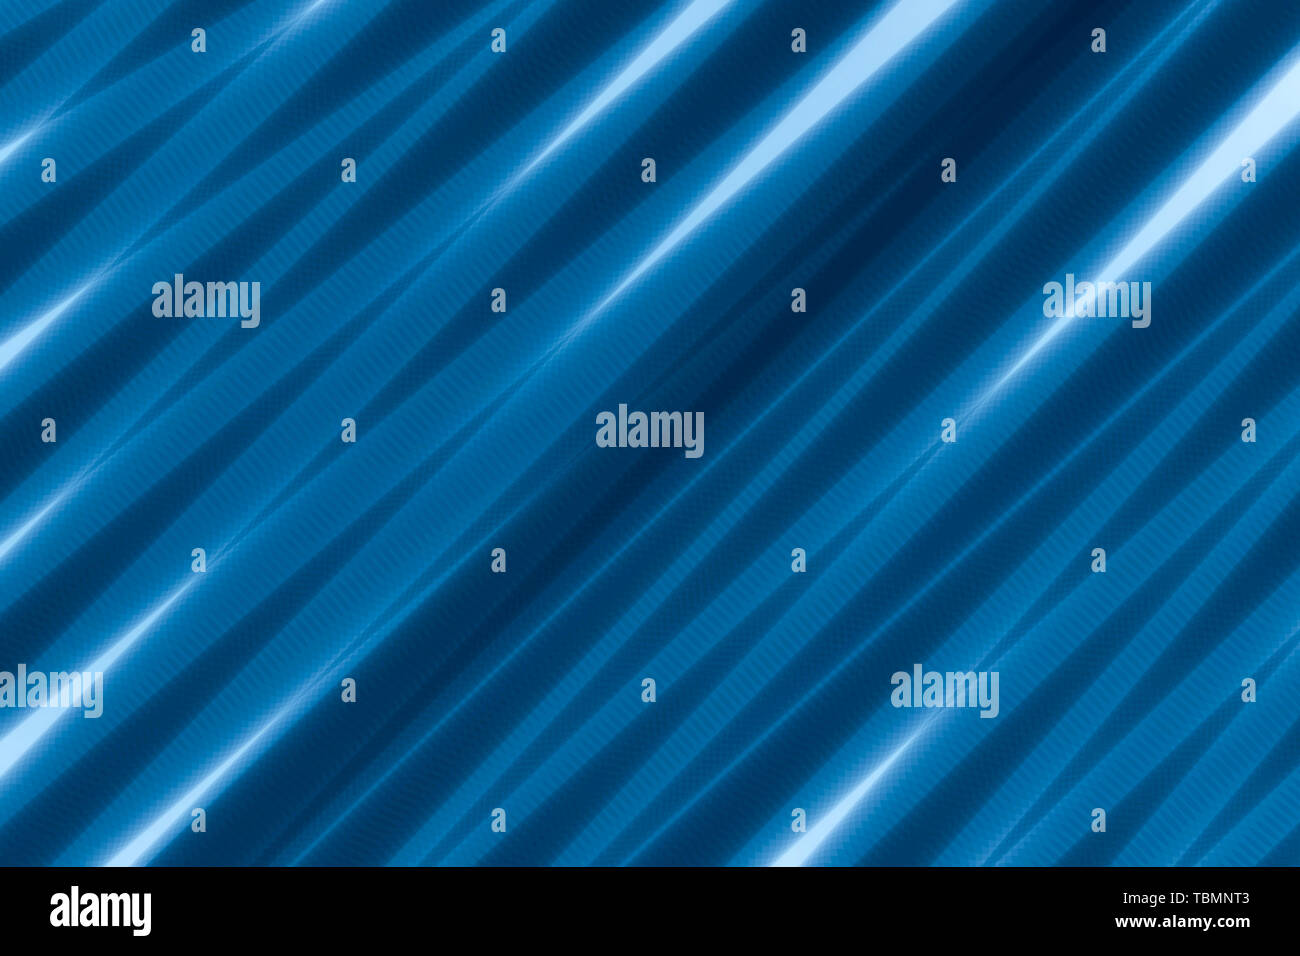 Illustration de blue abstract background with blurred magic neon light lines. Banque D'Images